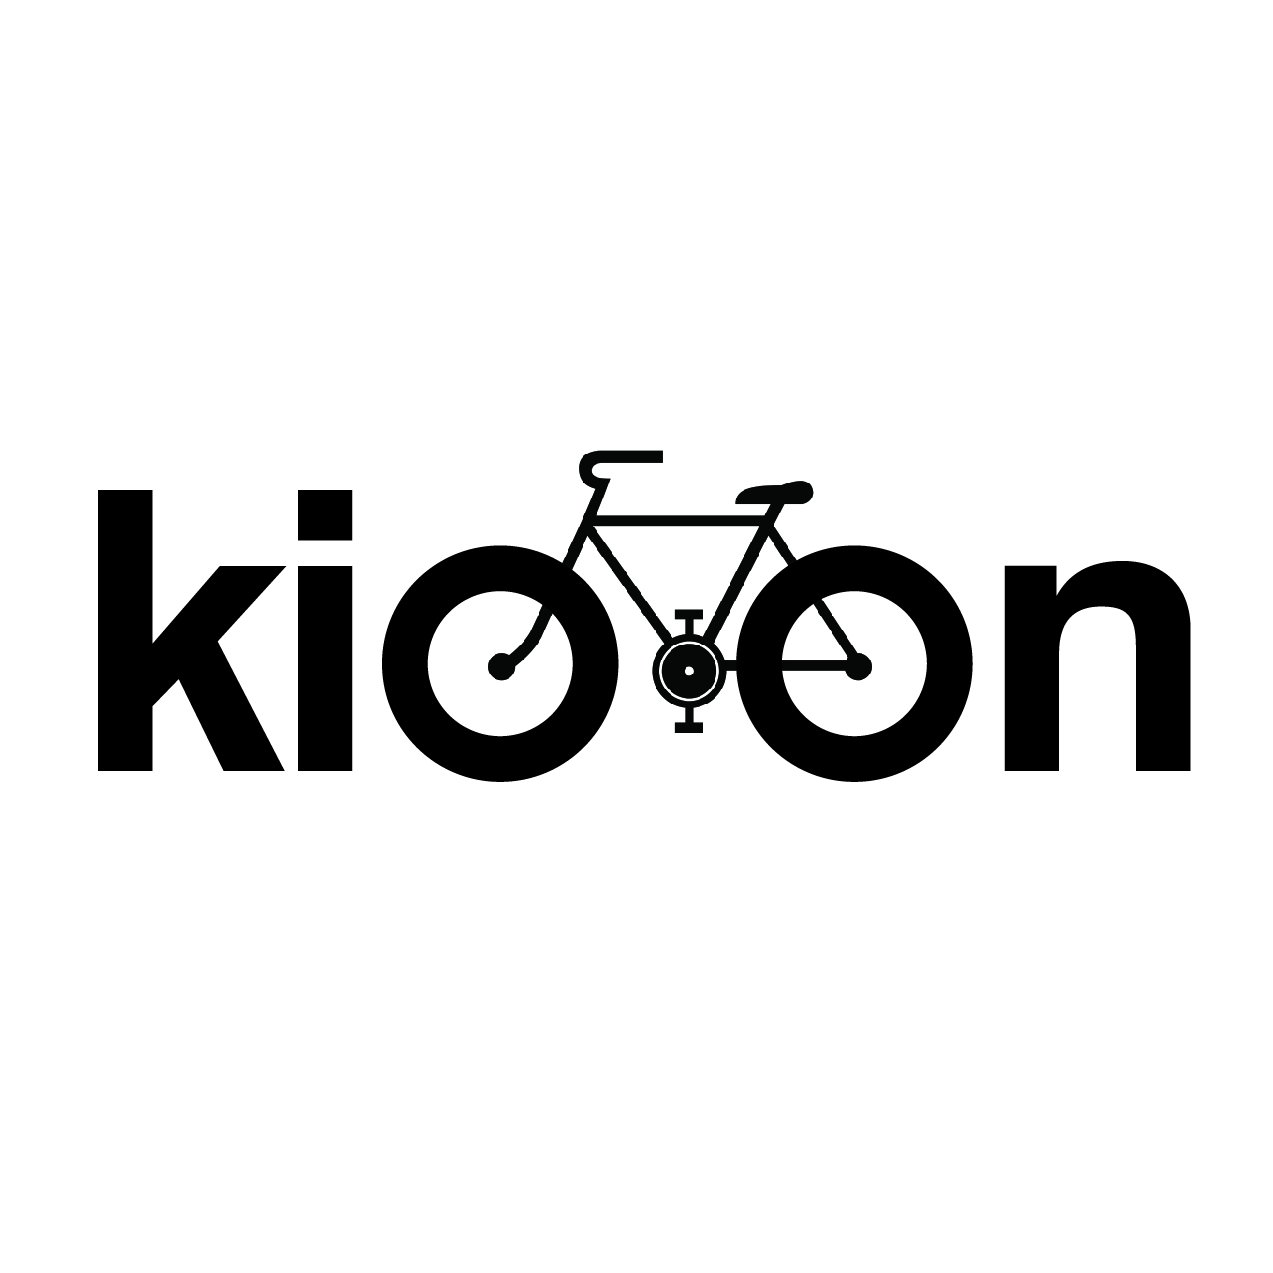 A startup building a smart gadget for cyclists to secure and track their bike while using the kinetic energy created.

Be green. Be secure. Be safe. Kioon.